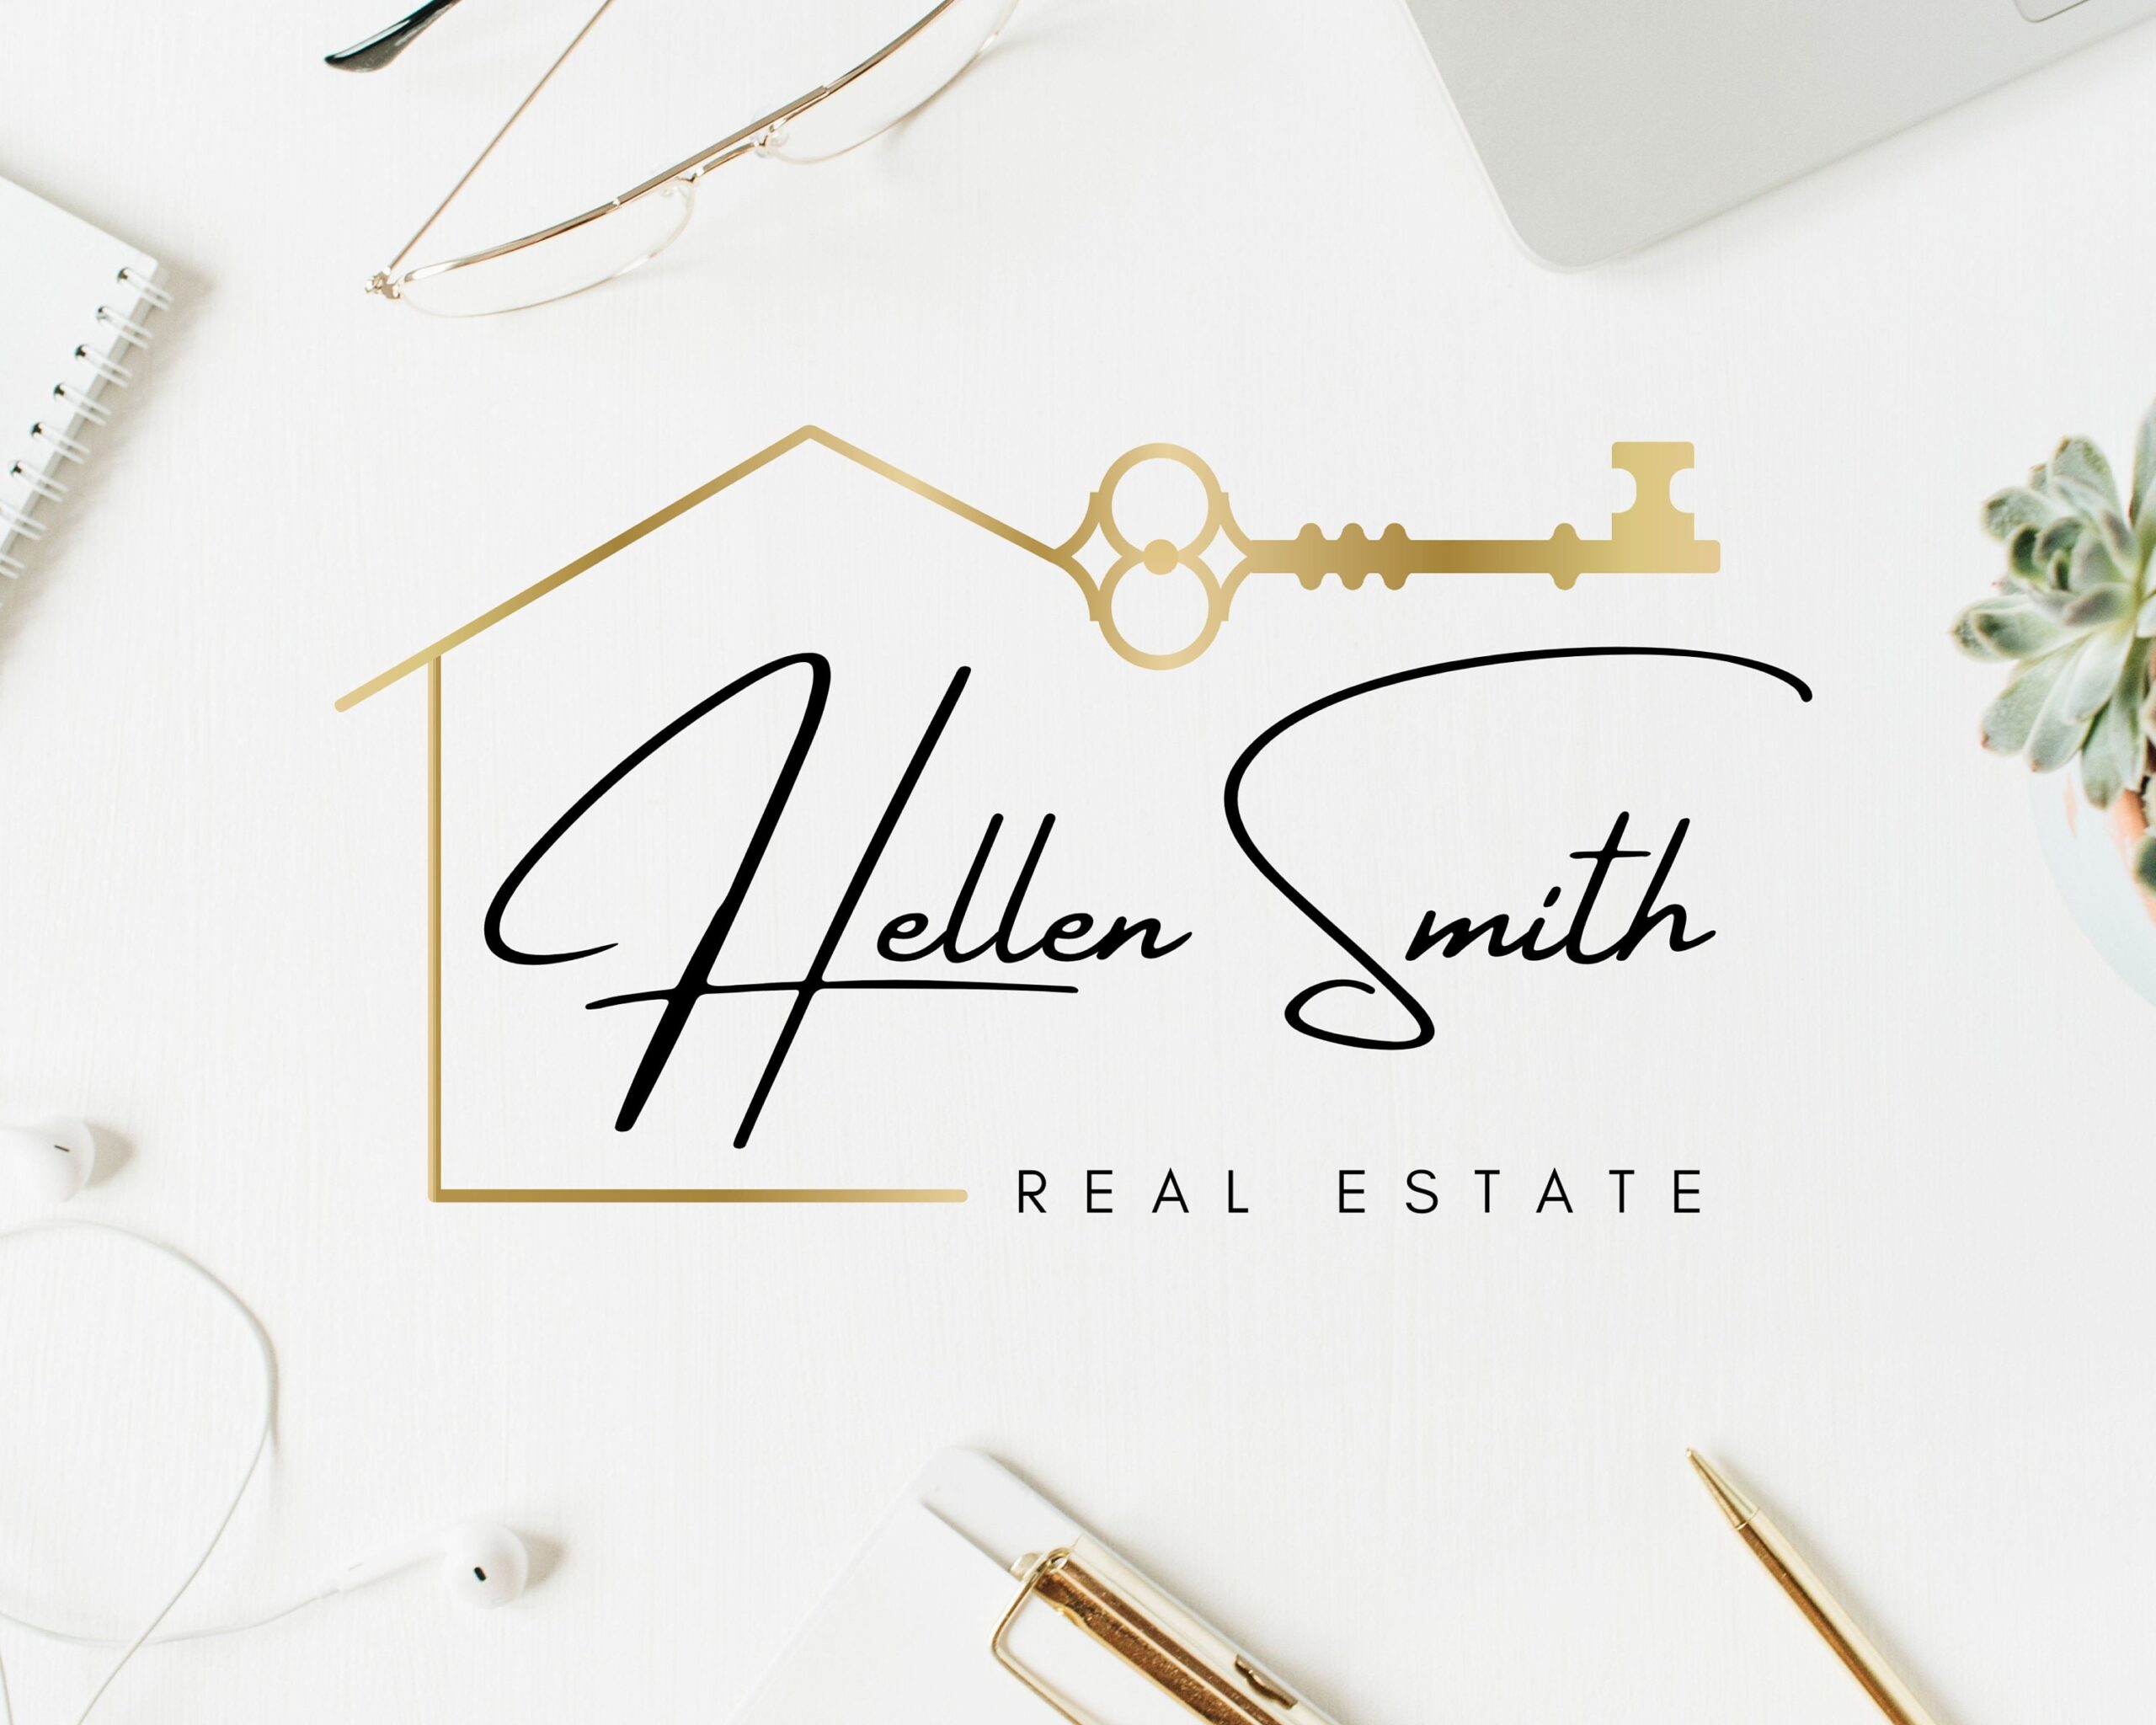 REAL ESTATE LOGO - Premade Logo Branding Pack - Logo -  Submarks -  Watermarks -  Stamps/Signs -  High-Quality Branding for Real Estate Agents